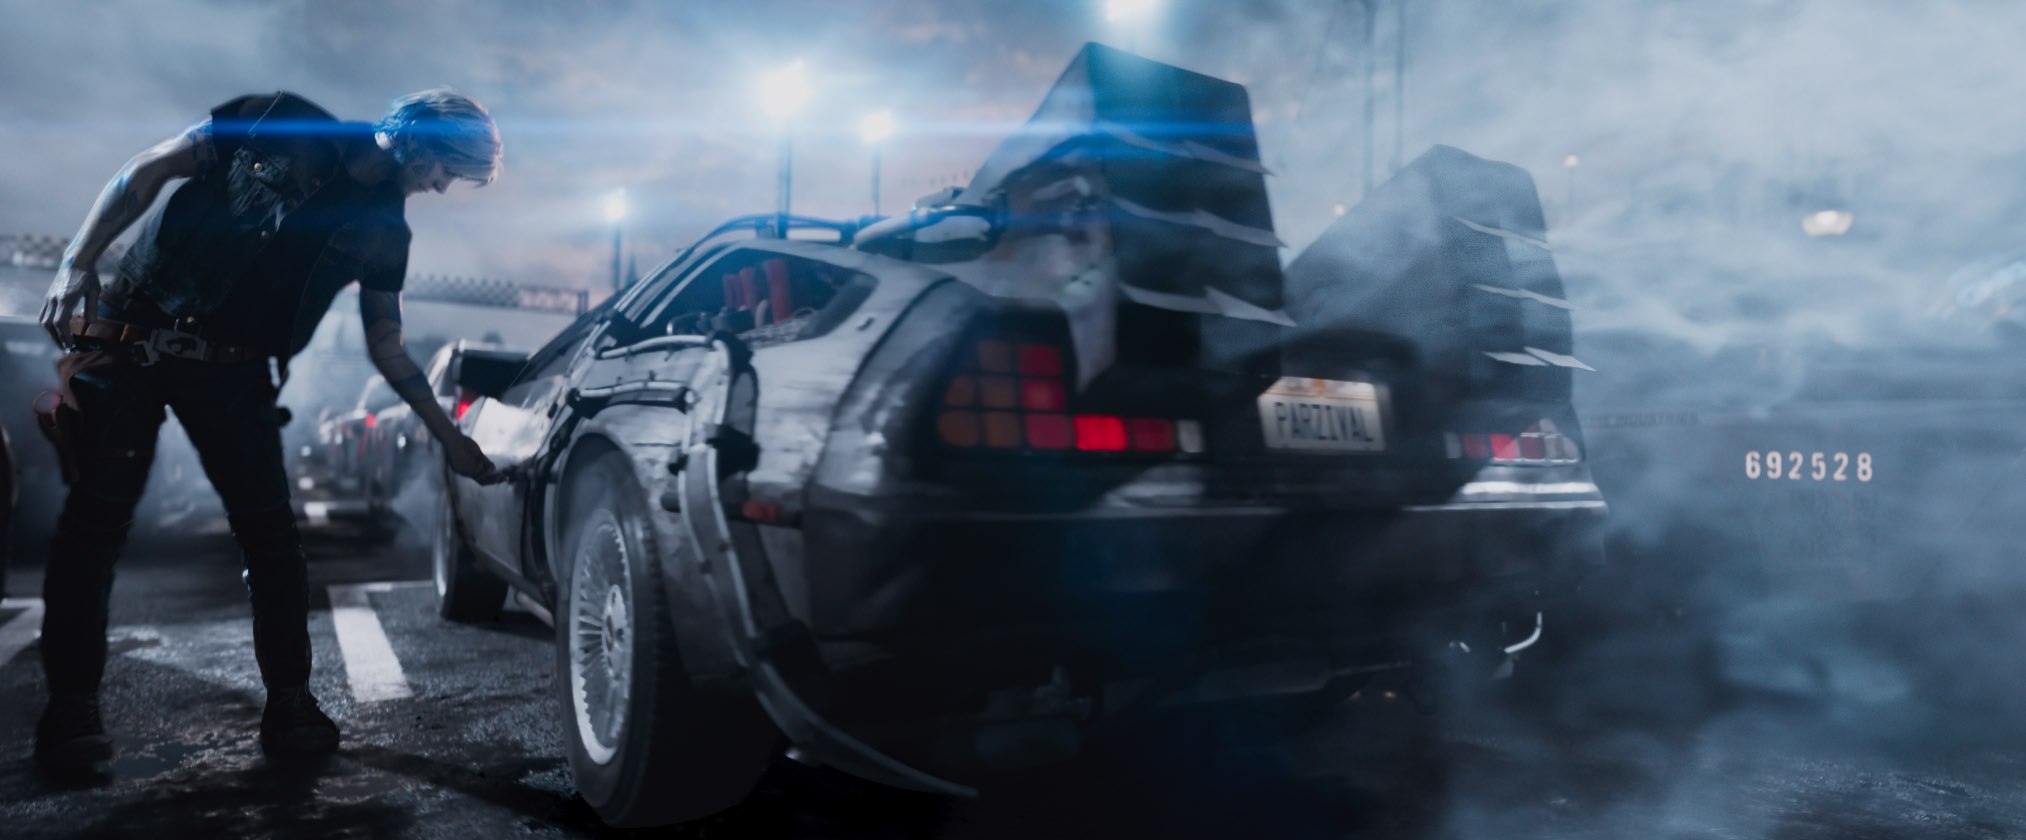 Ready Player One – It's All About Character